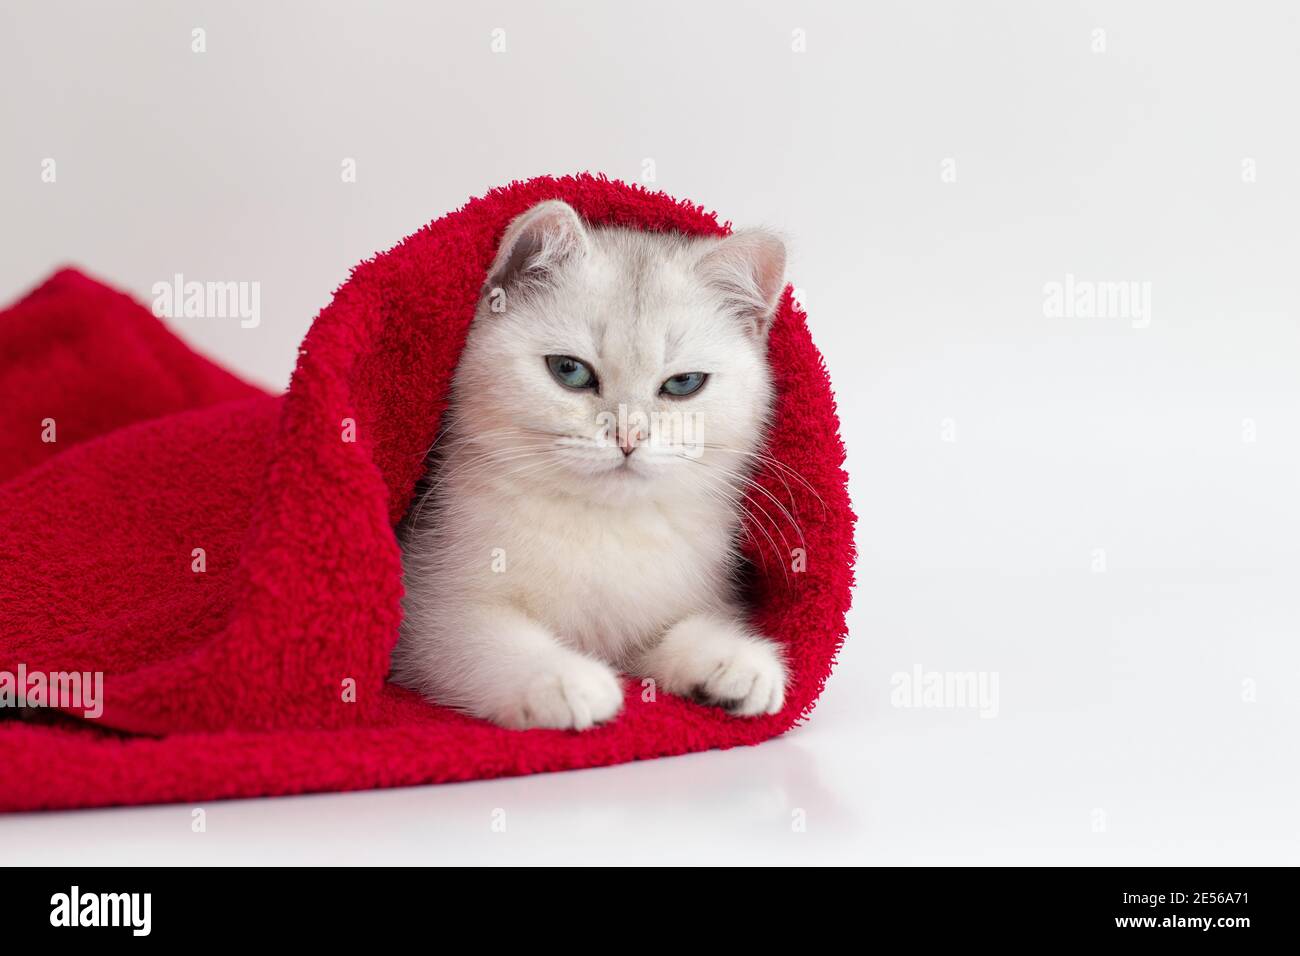 One white cat lies in a red towel on a white background Stock Photo